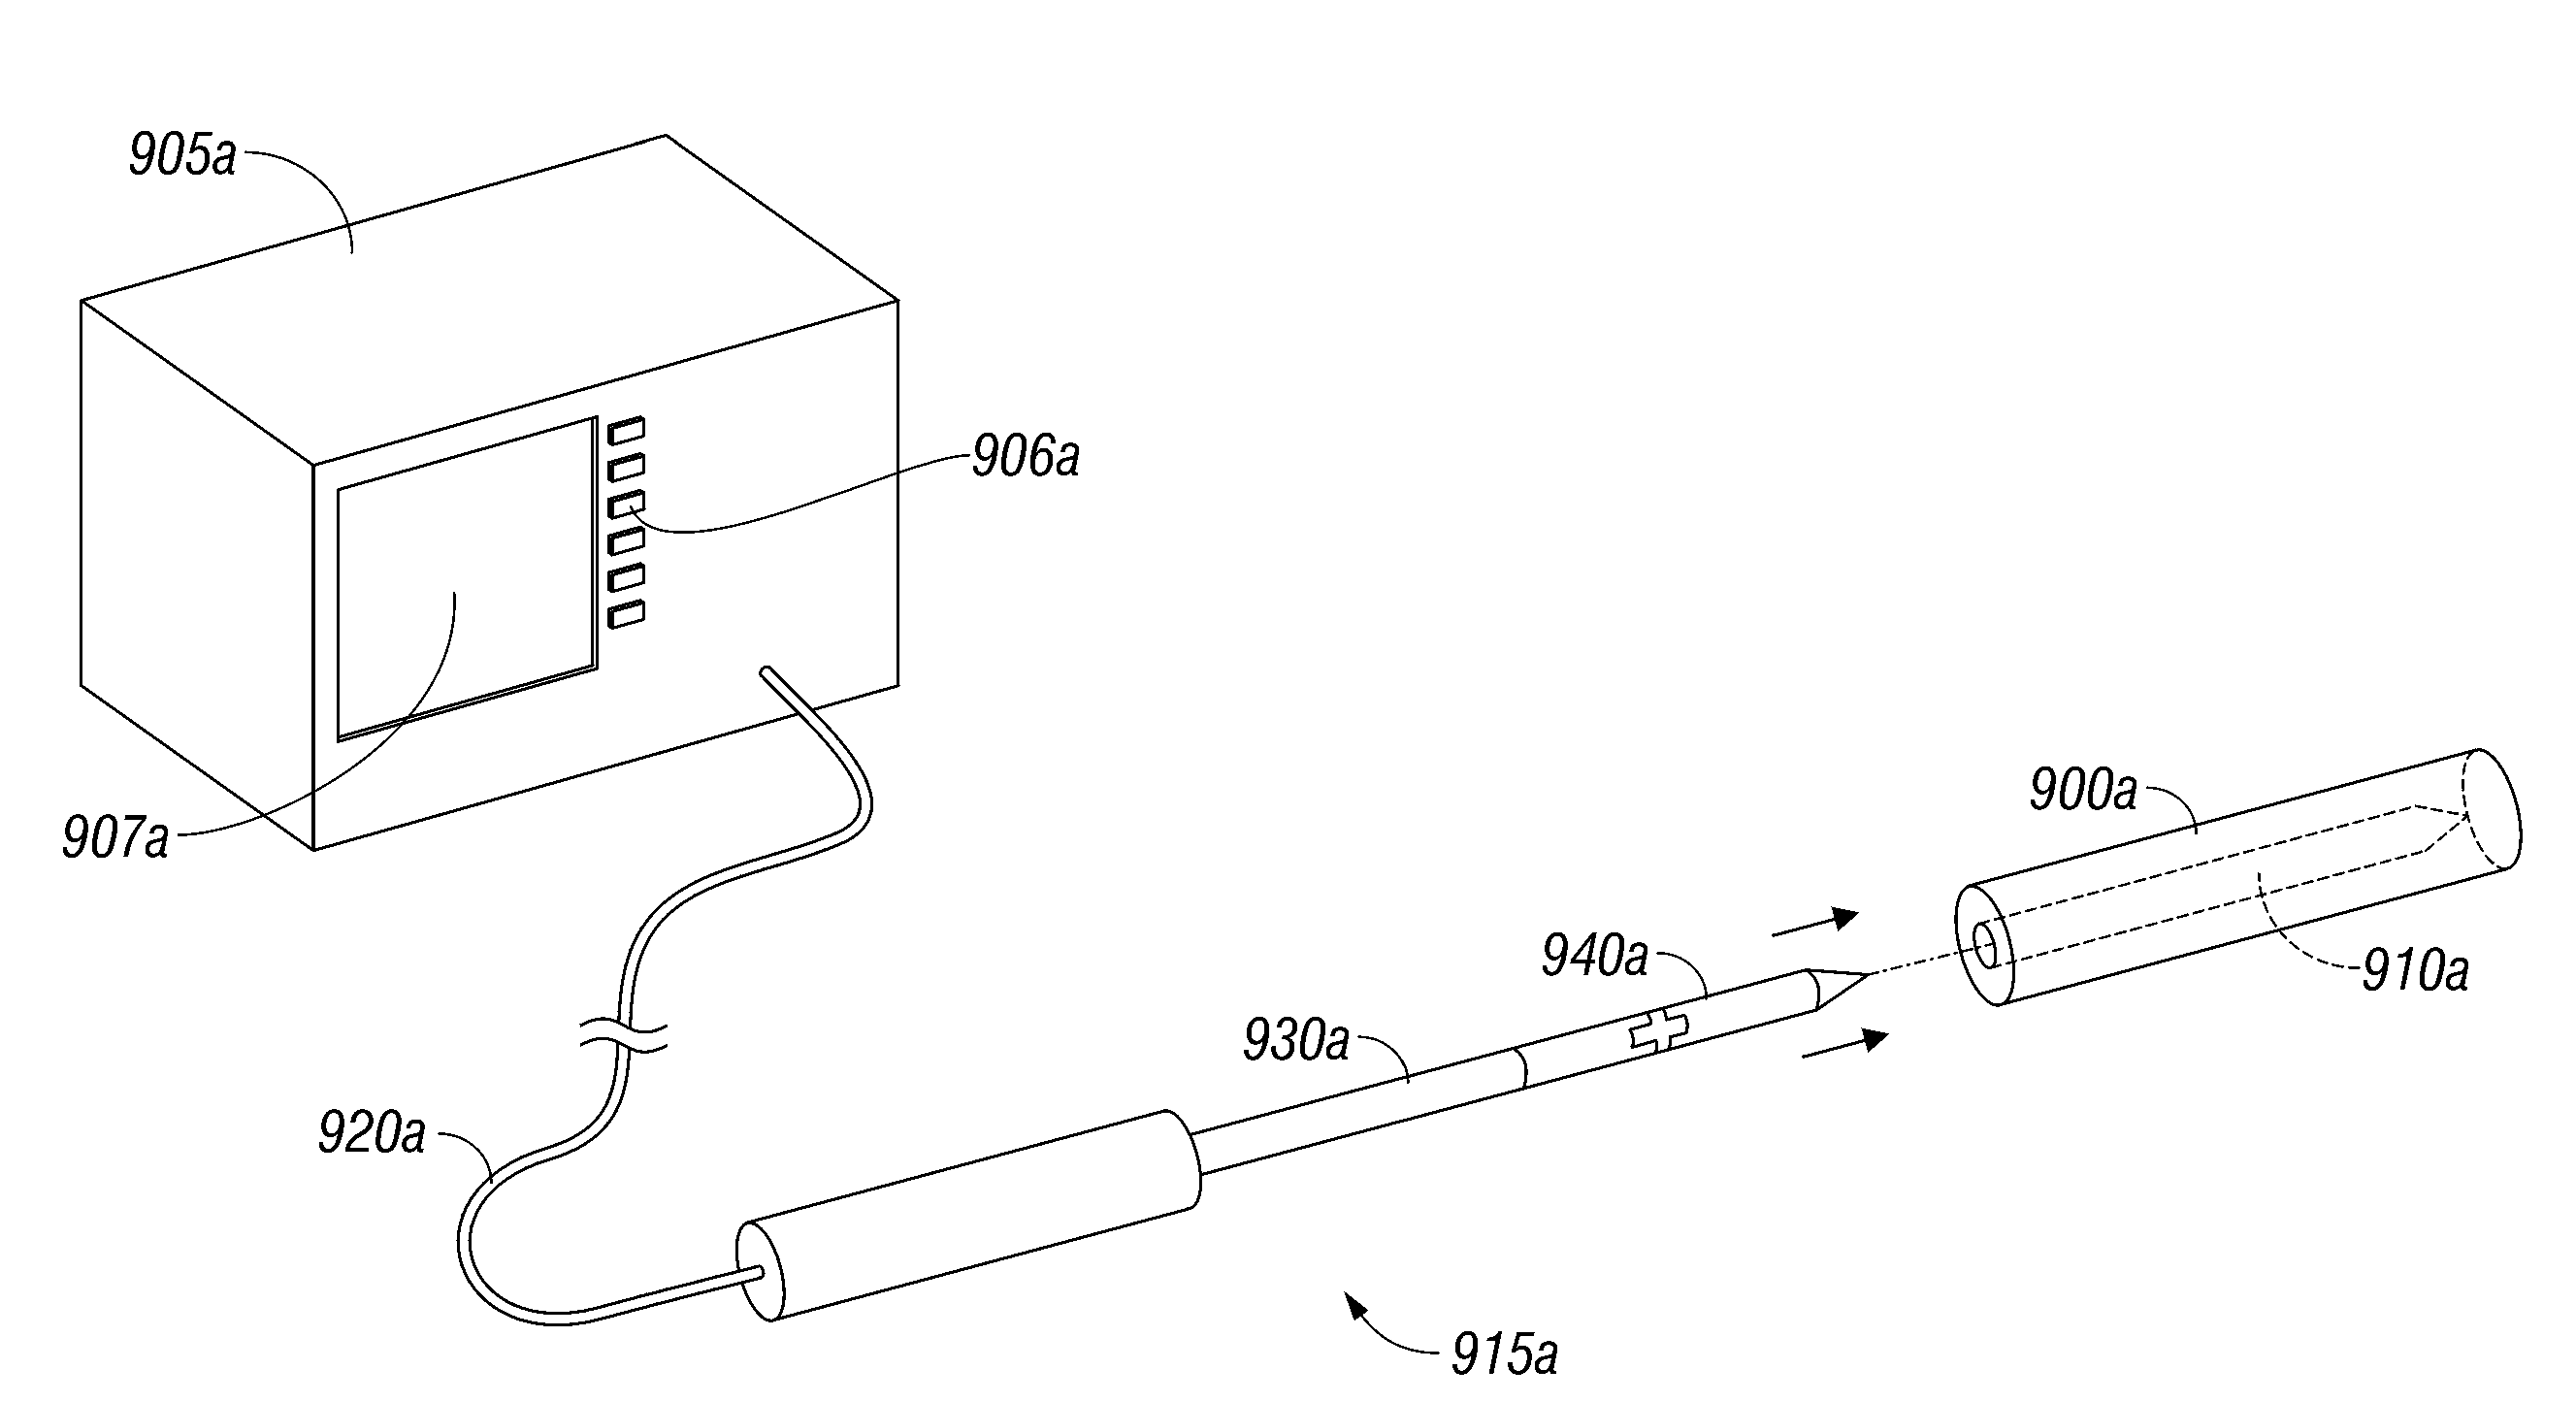 Intermittent microwave energy delivery system